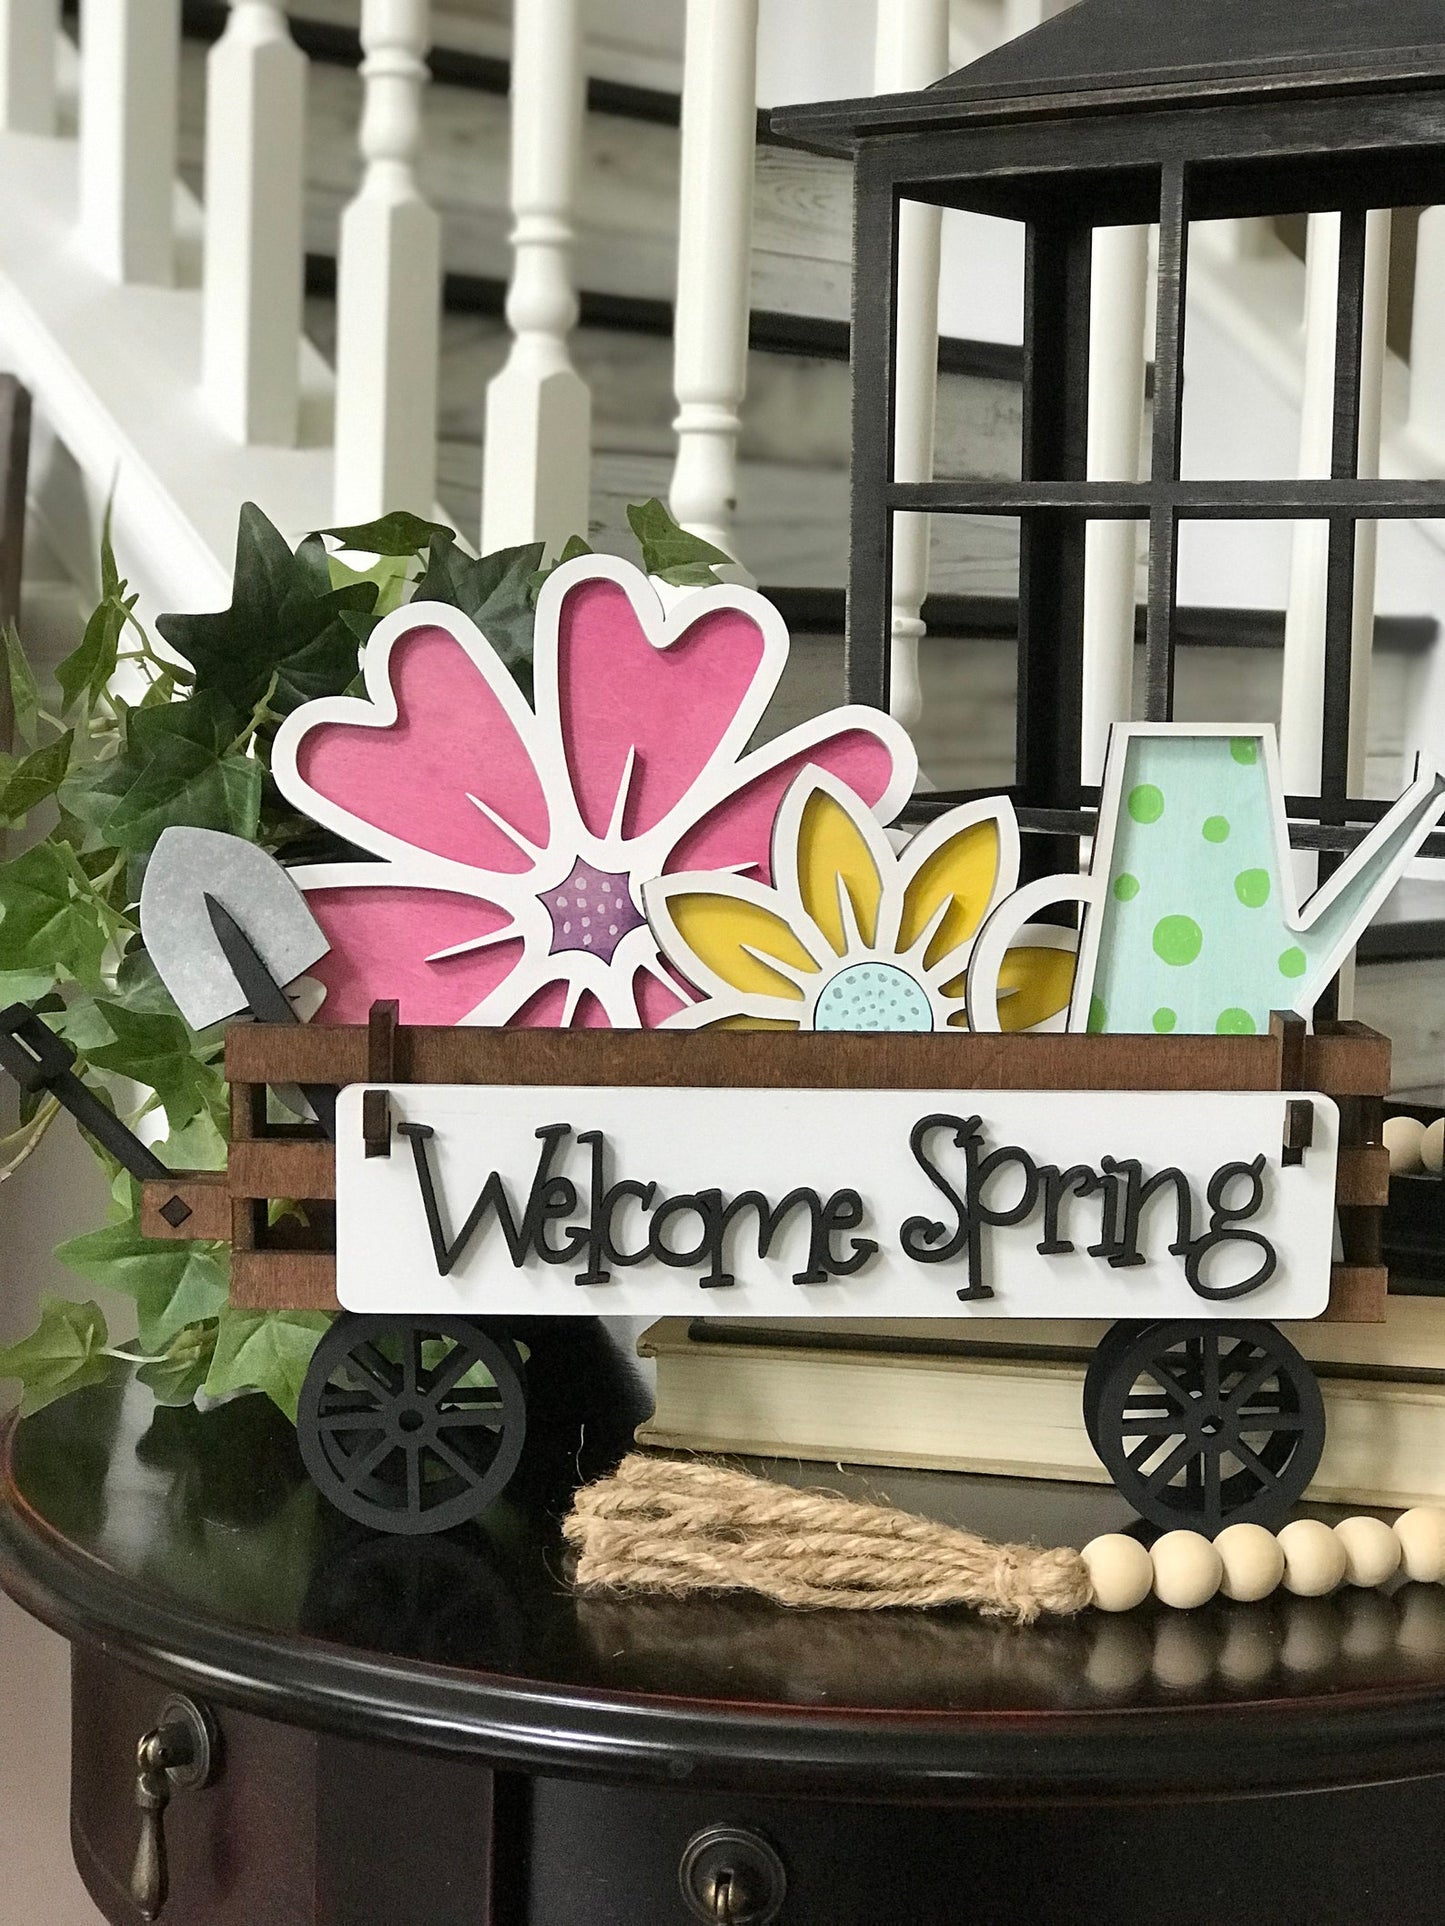 Spring Interchangeable Signs For Wagon/Shelf Sitter